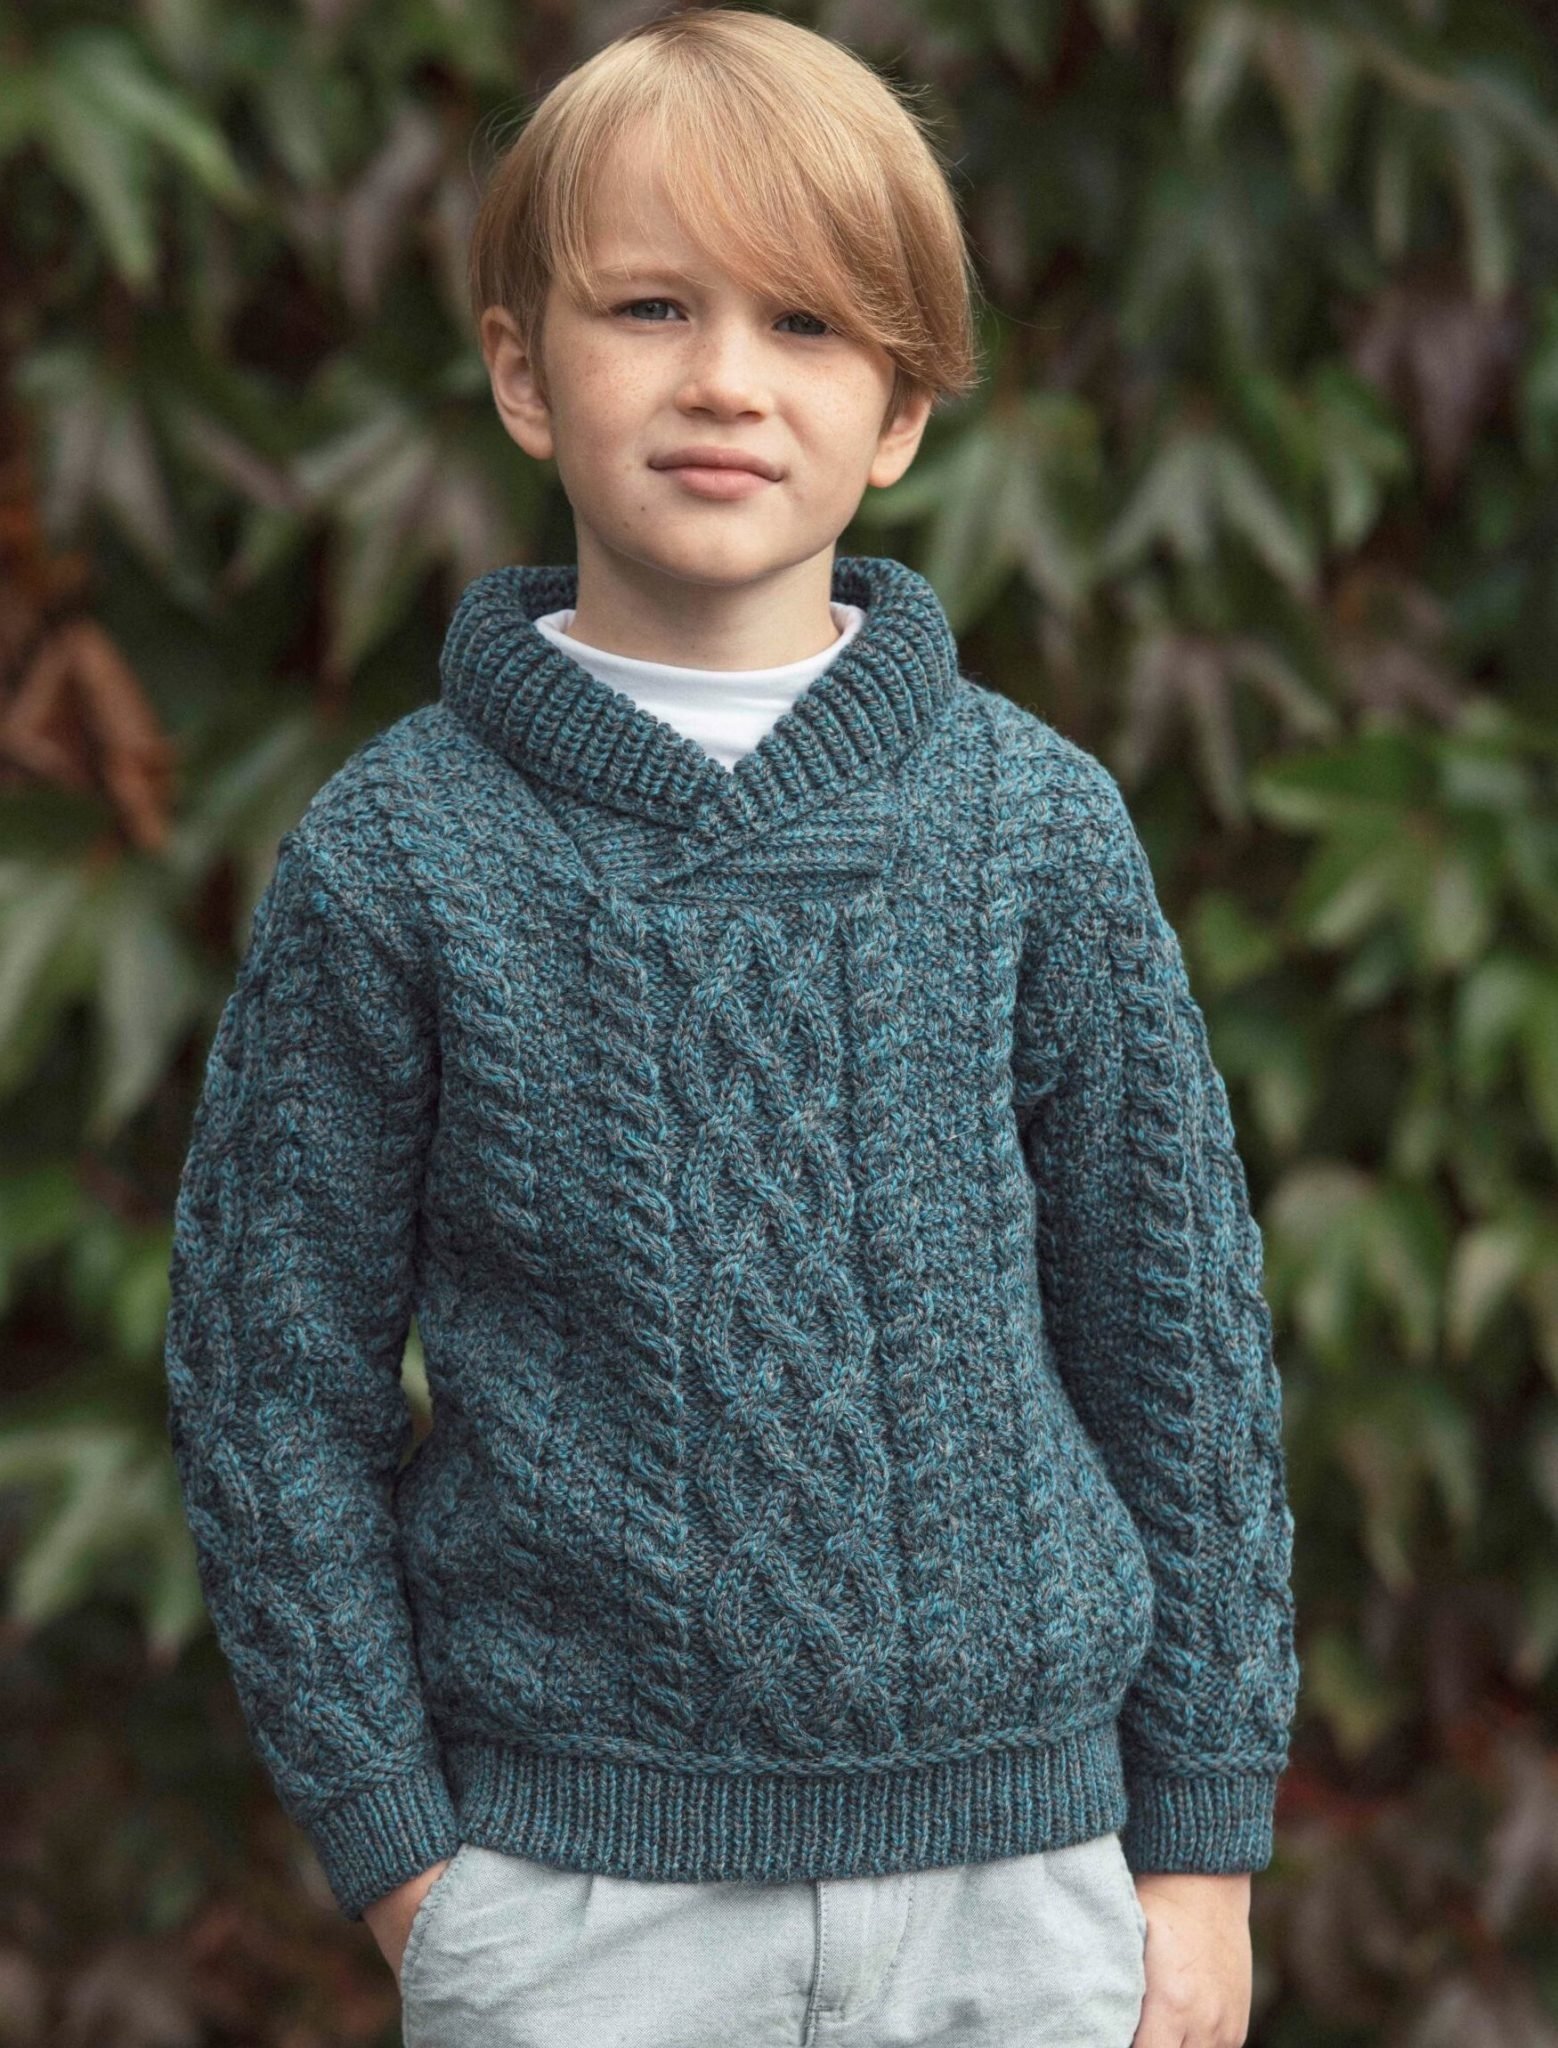 KIDS CLOTHES CHILDREN'S SHAWL COLLAR SWEATER - Peacock